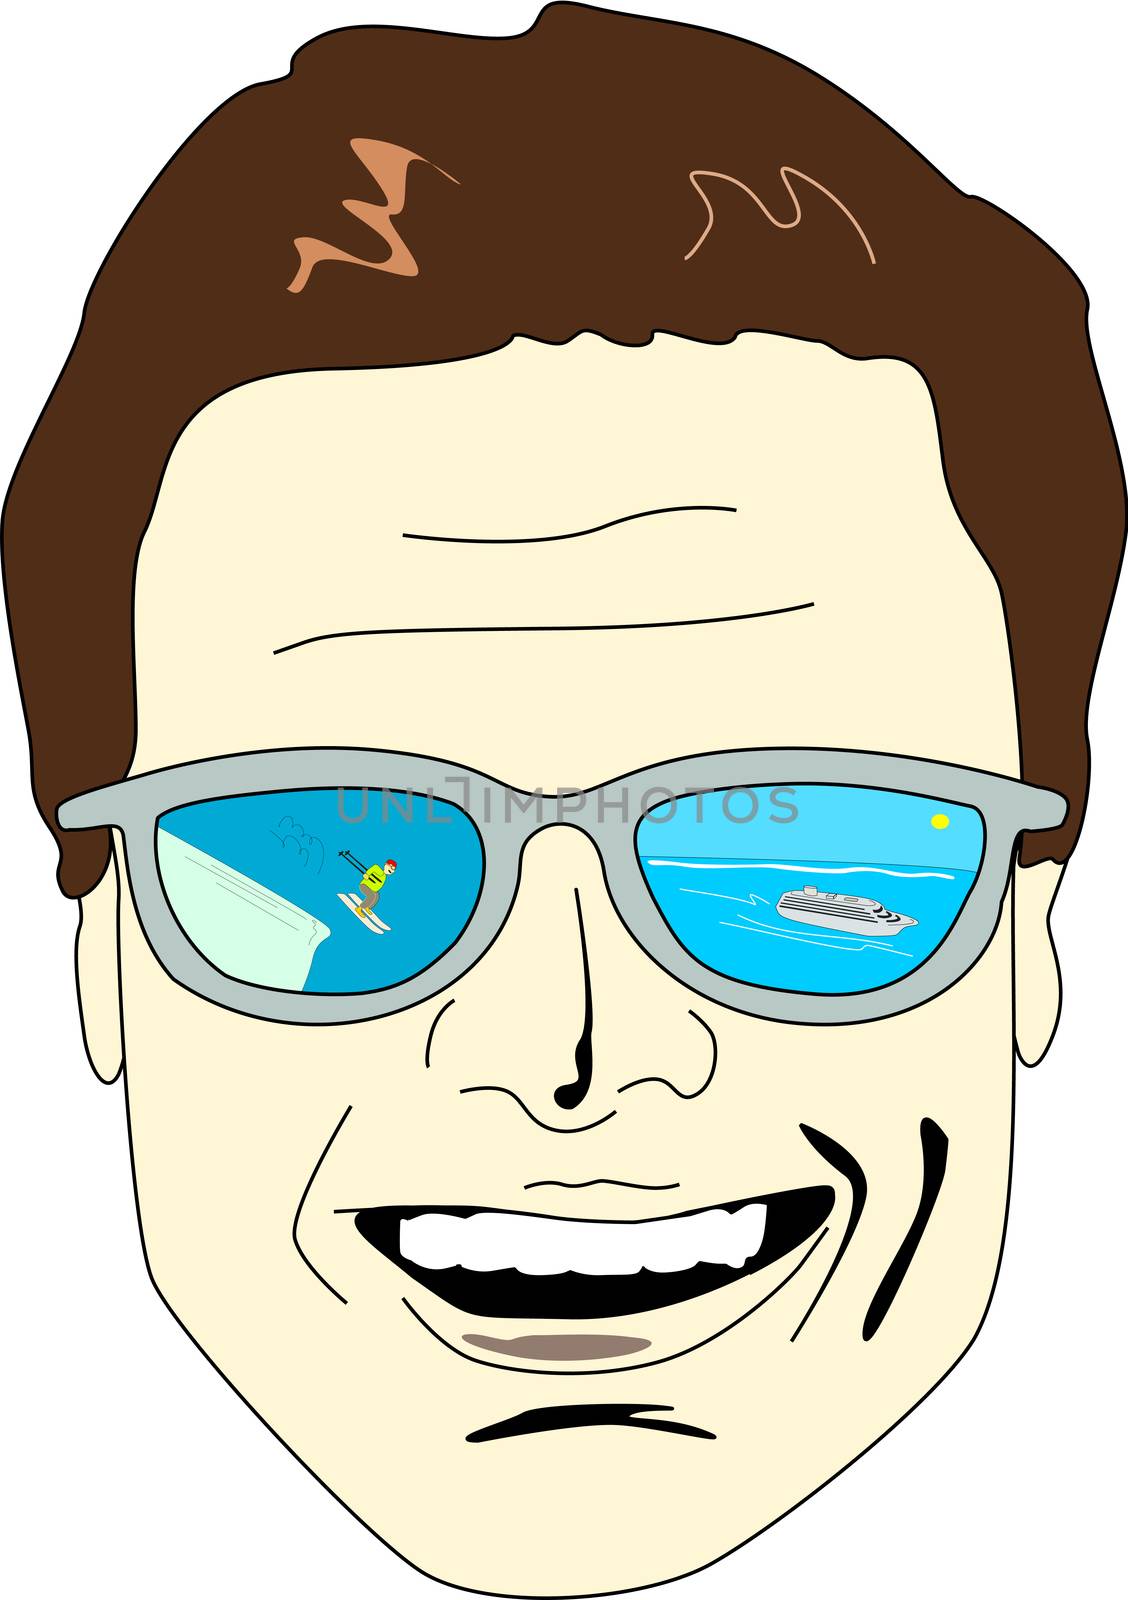 A happy man's face is portrayed with sunglasses which lens shows a ski station and a cruise ship, touristic options for travelers.